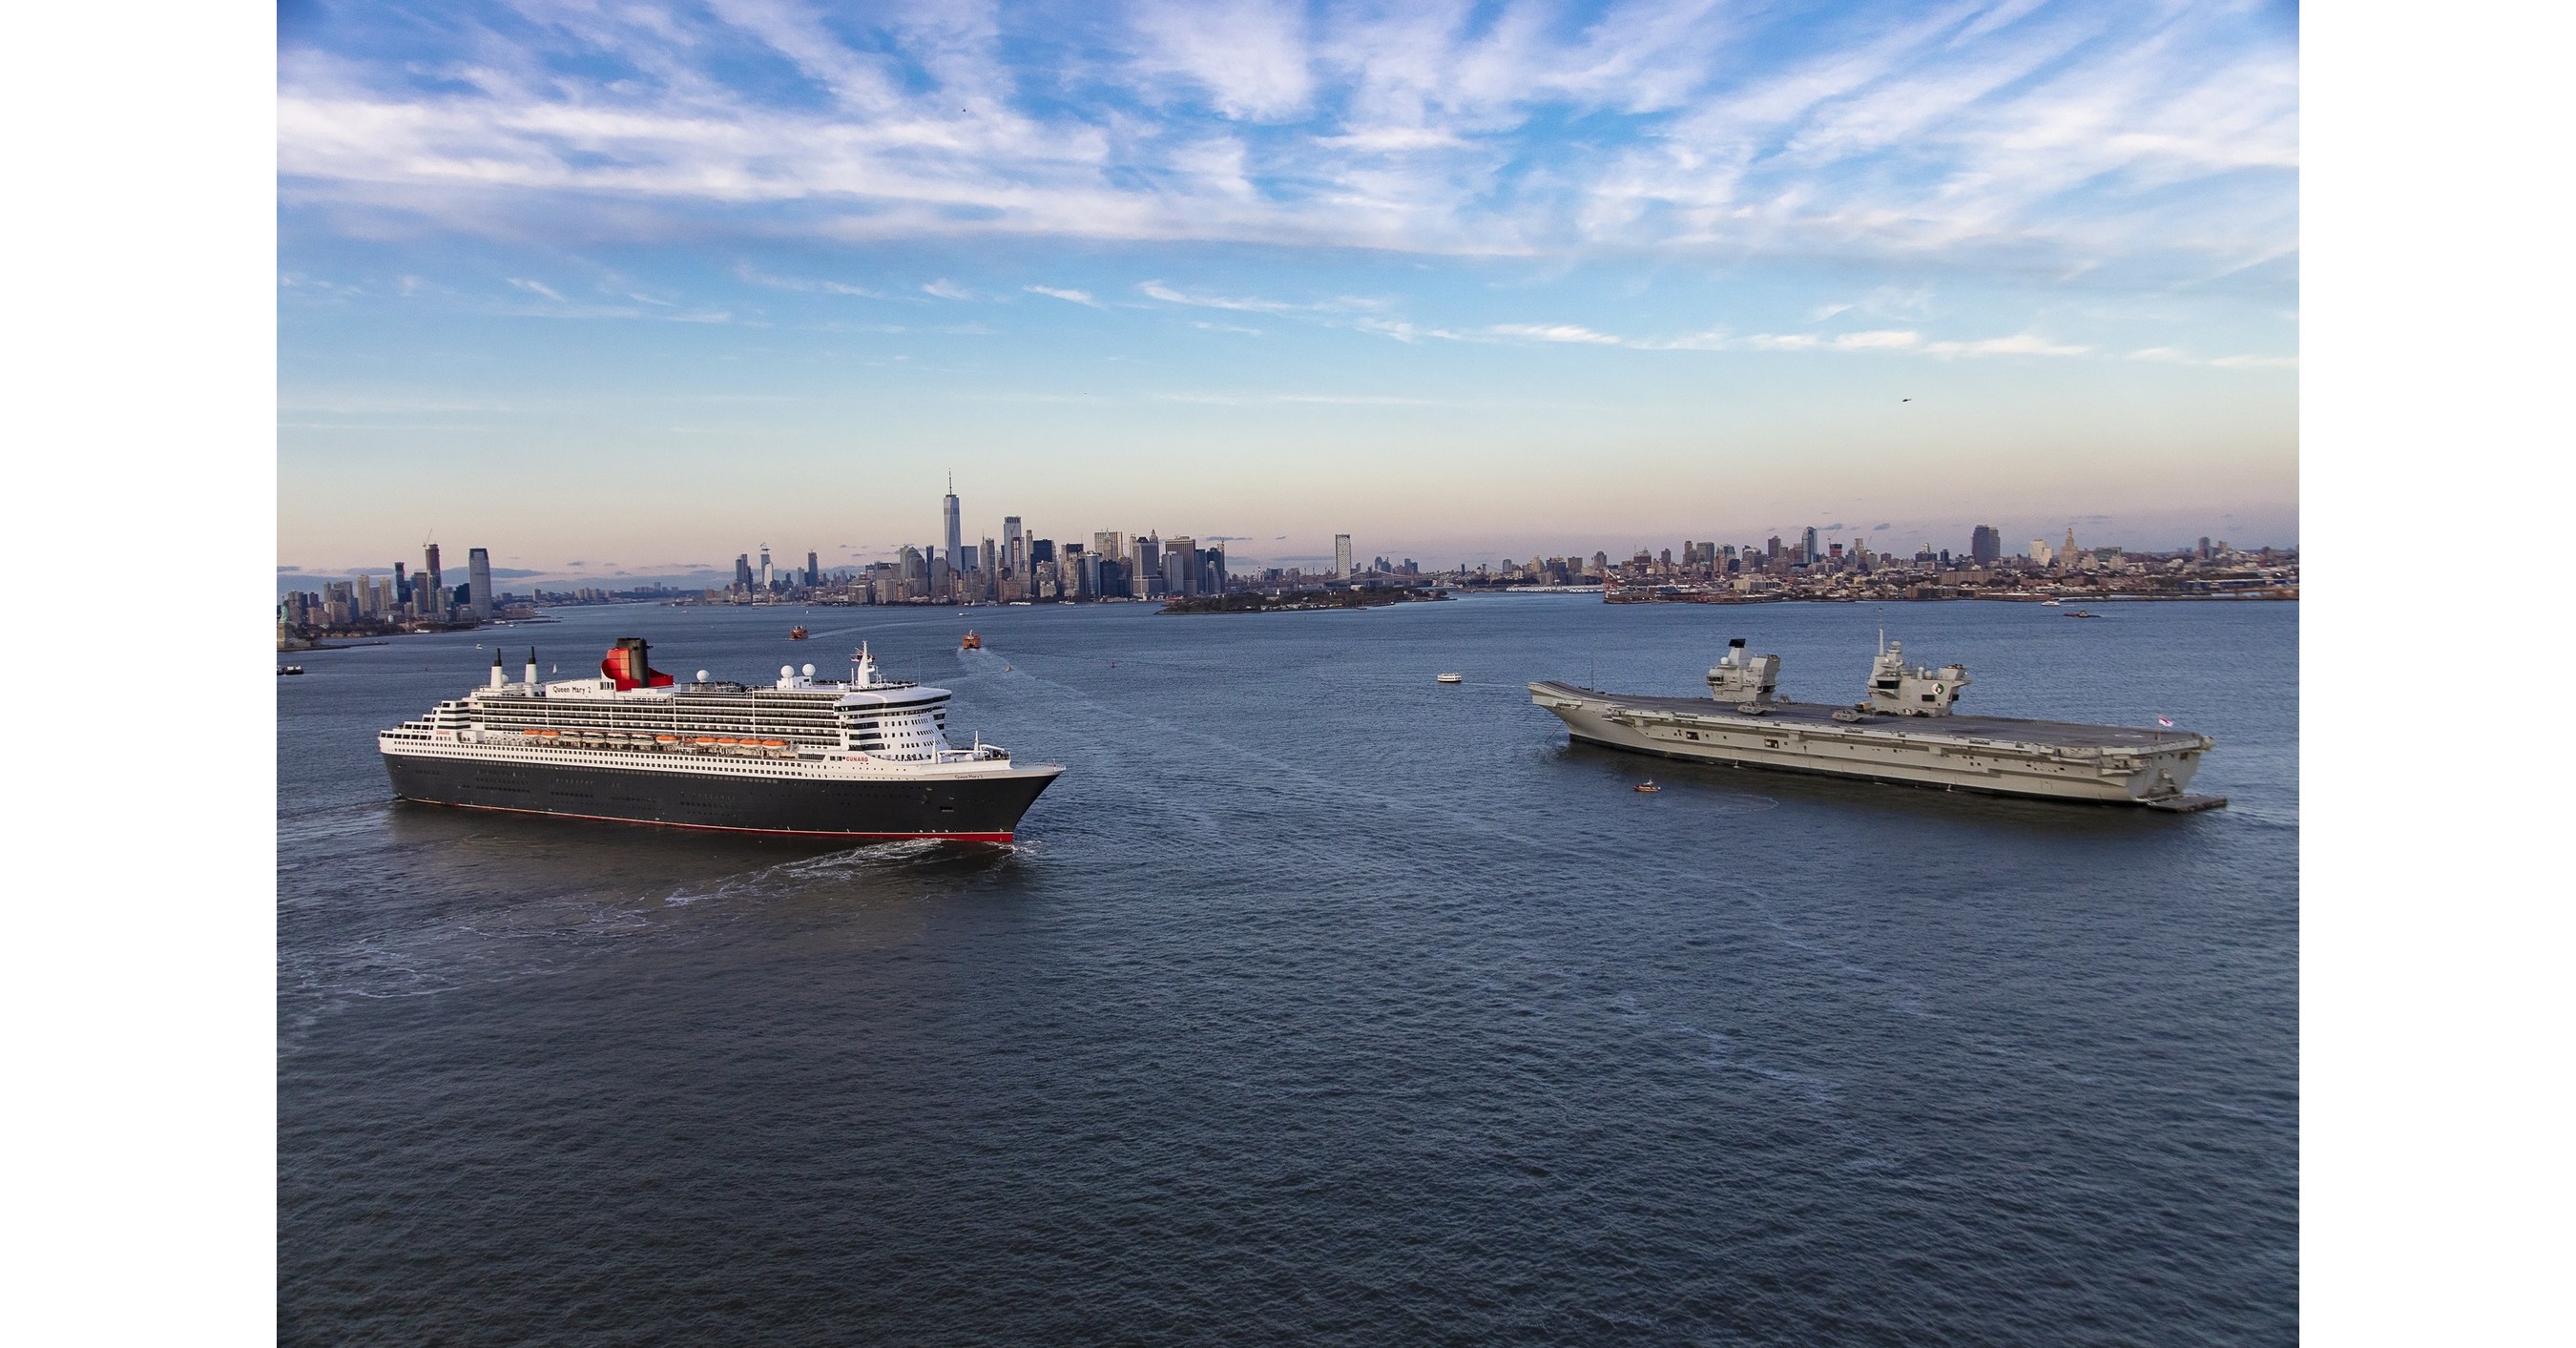 Iconic Vessels Queen Mary 2 And Hms Queen Elizabeth Meet For Royal Reception In New York Harbor